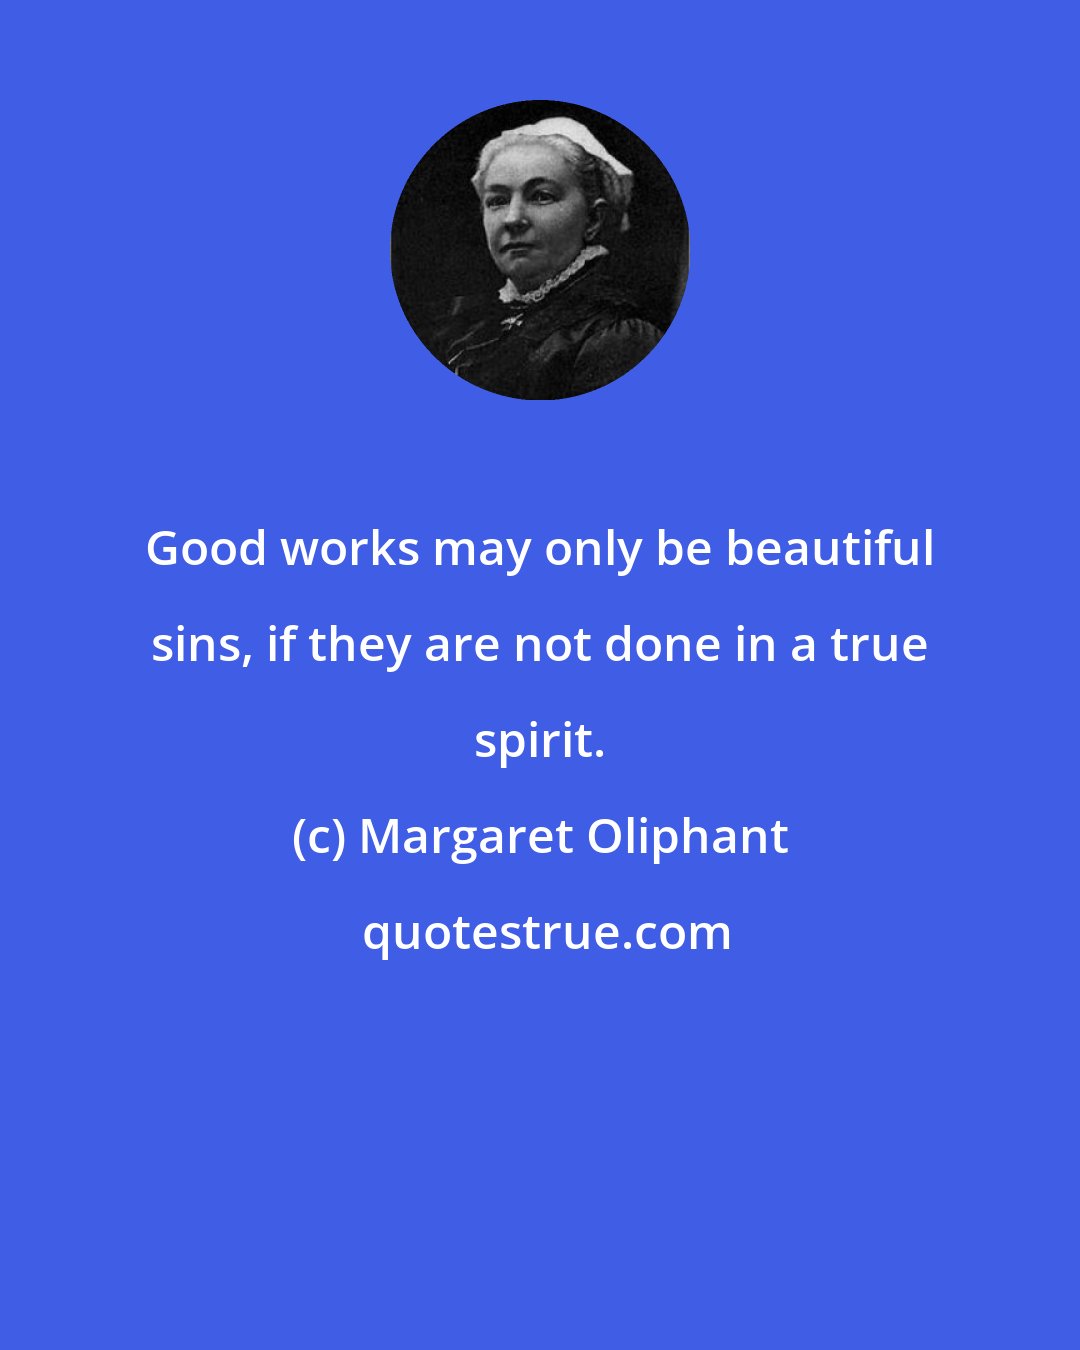 Margaret Oliphant: Good works may only be beautiful sins, if they are not done in a true spirit.